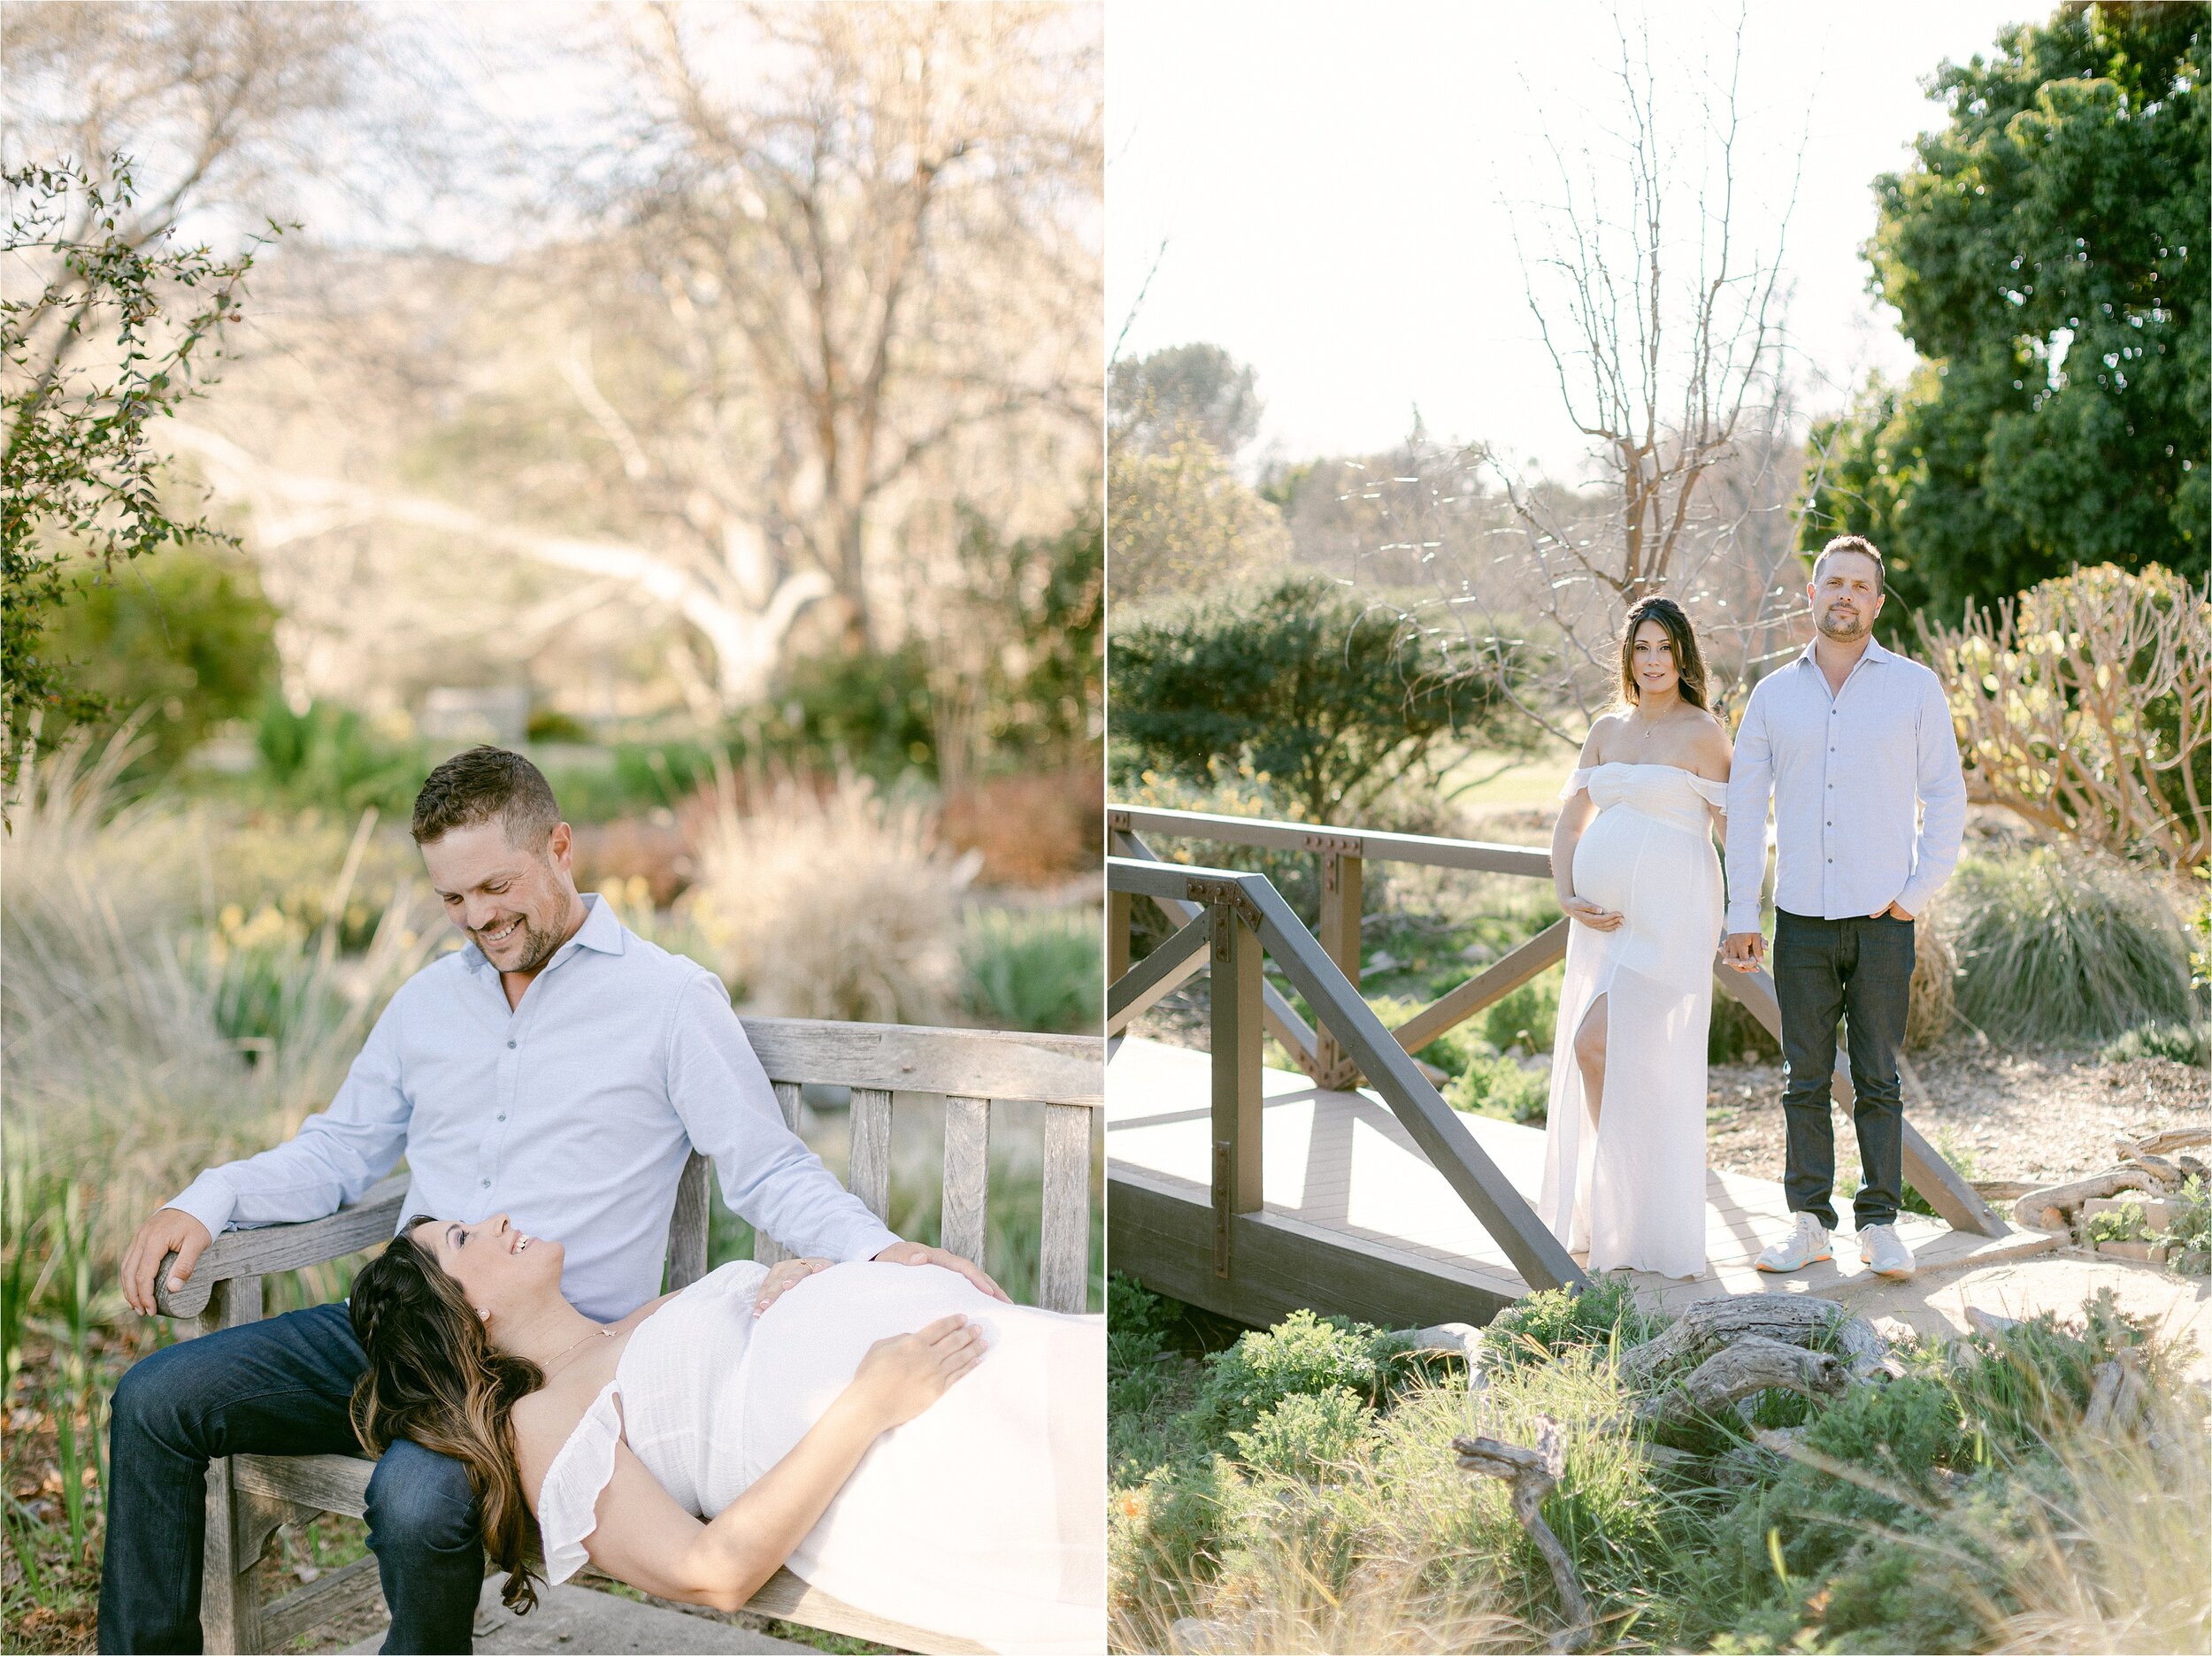 Husband sits on wooden bench while wife lays her head on his lap during their maternity photos at the LA Arboretum